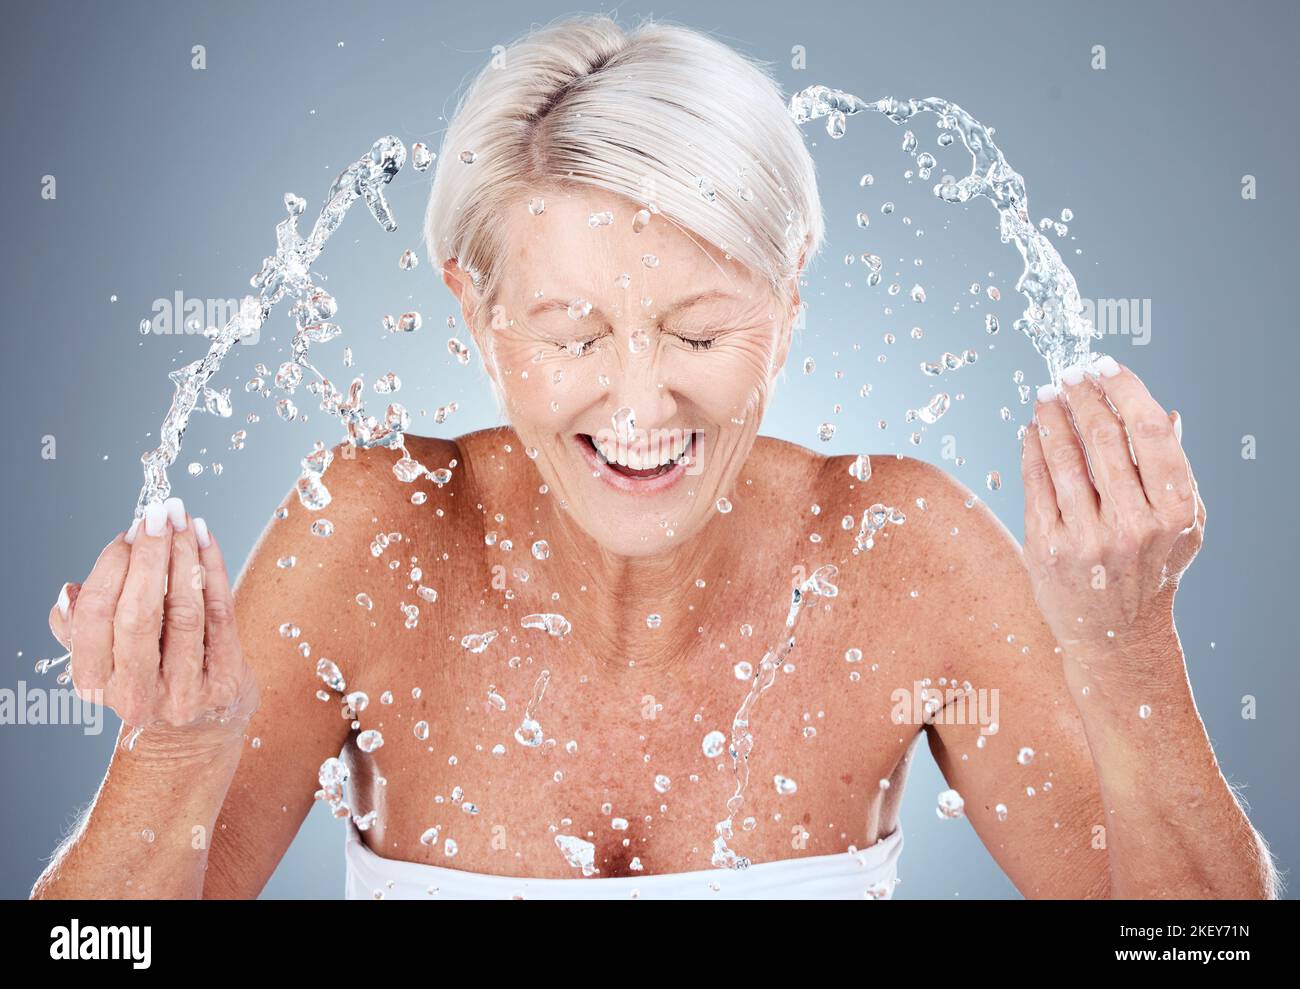 Mature woman, water splash or washing face in skincare grooming routine, morning hygiene maintenance or healthcare wellness. Smile, happy or elderly Stock Photo